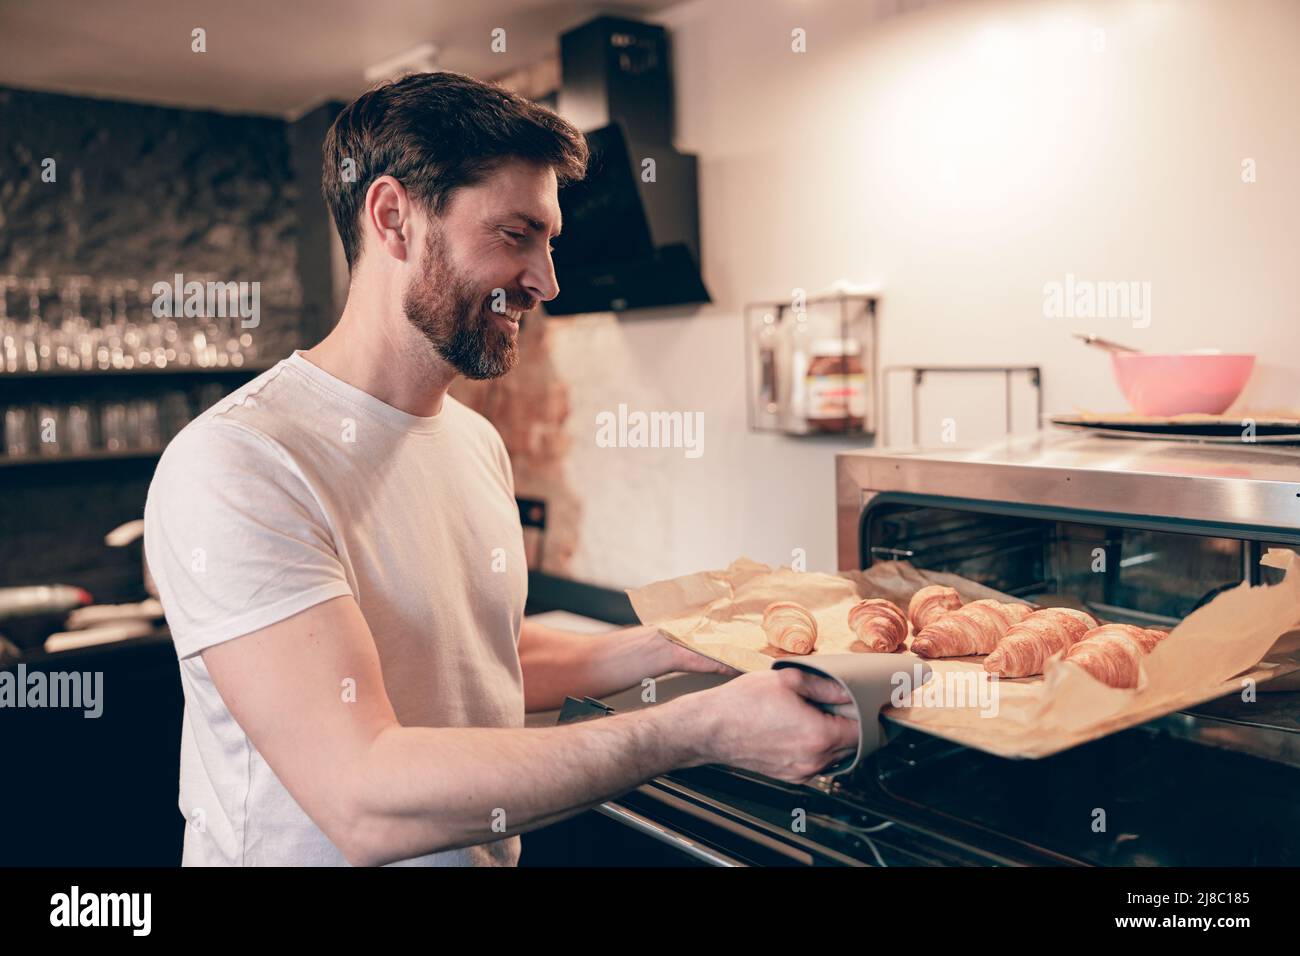 Caucasian young handsome baker taking out croissants out of oven and smiling. Bakery concept. Stock Photo